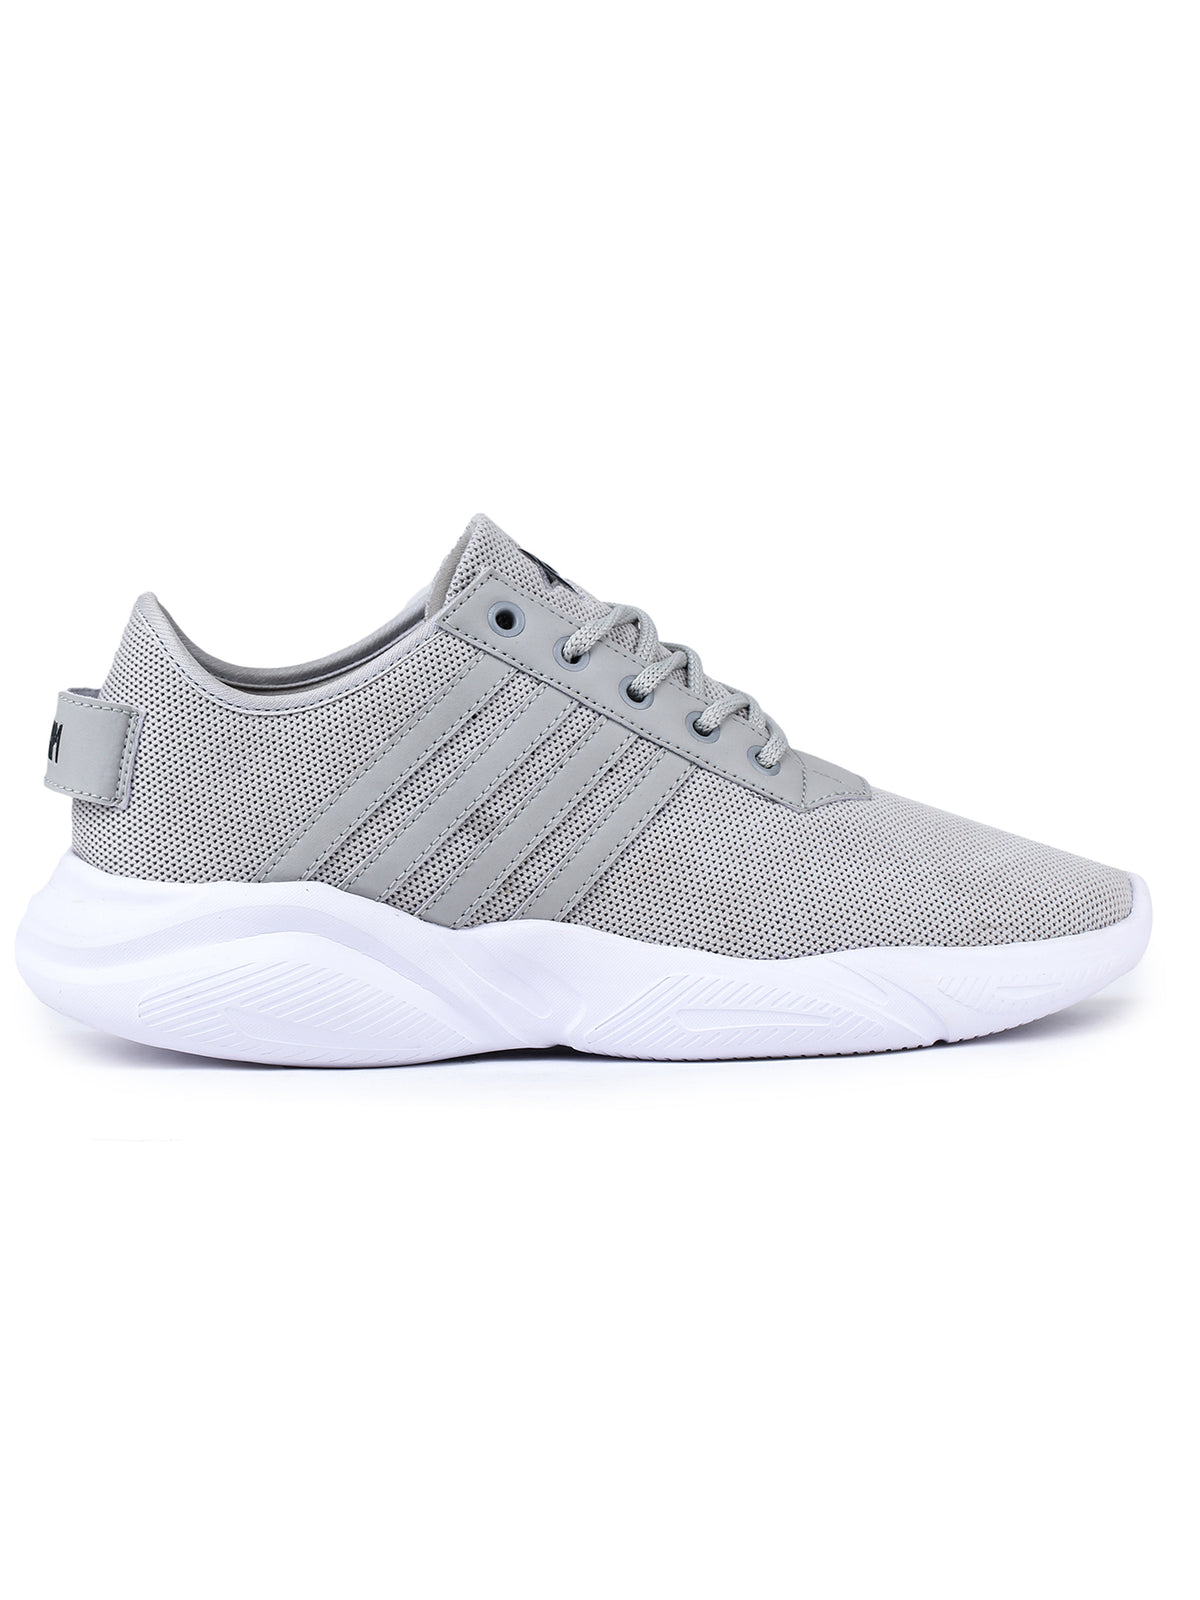 Grey Solid Mesh Lace Up Lifestyle Casual Shoes For Men